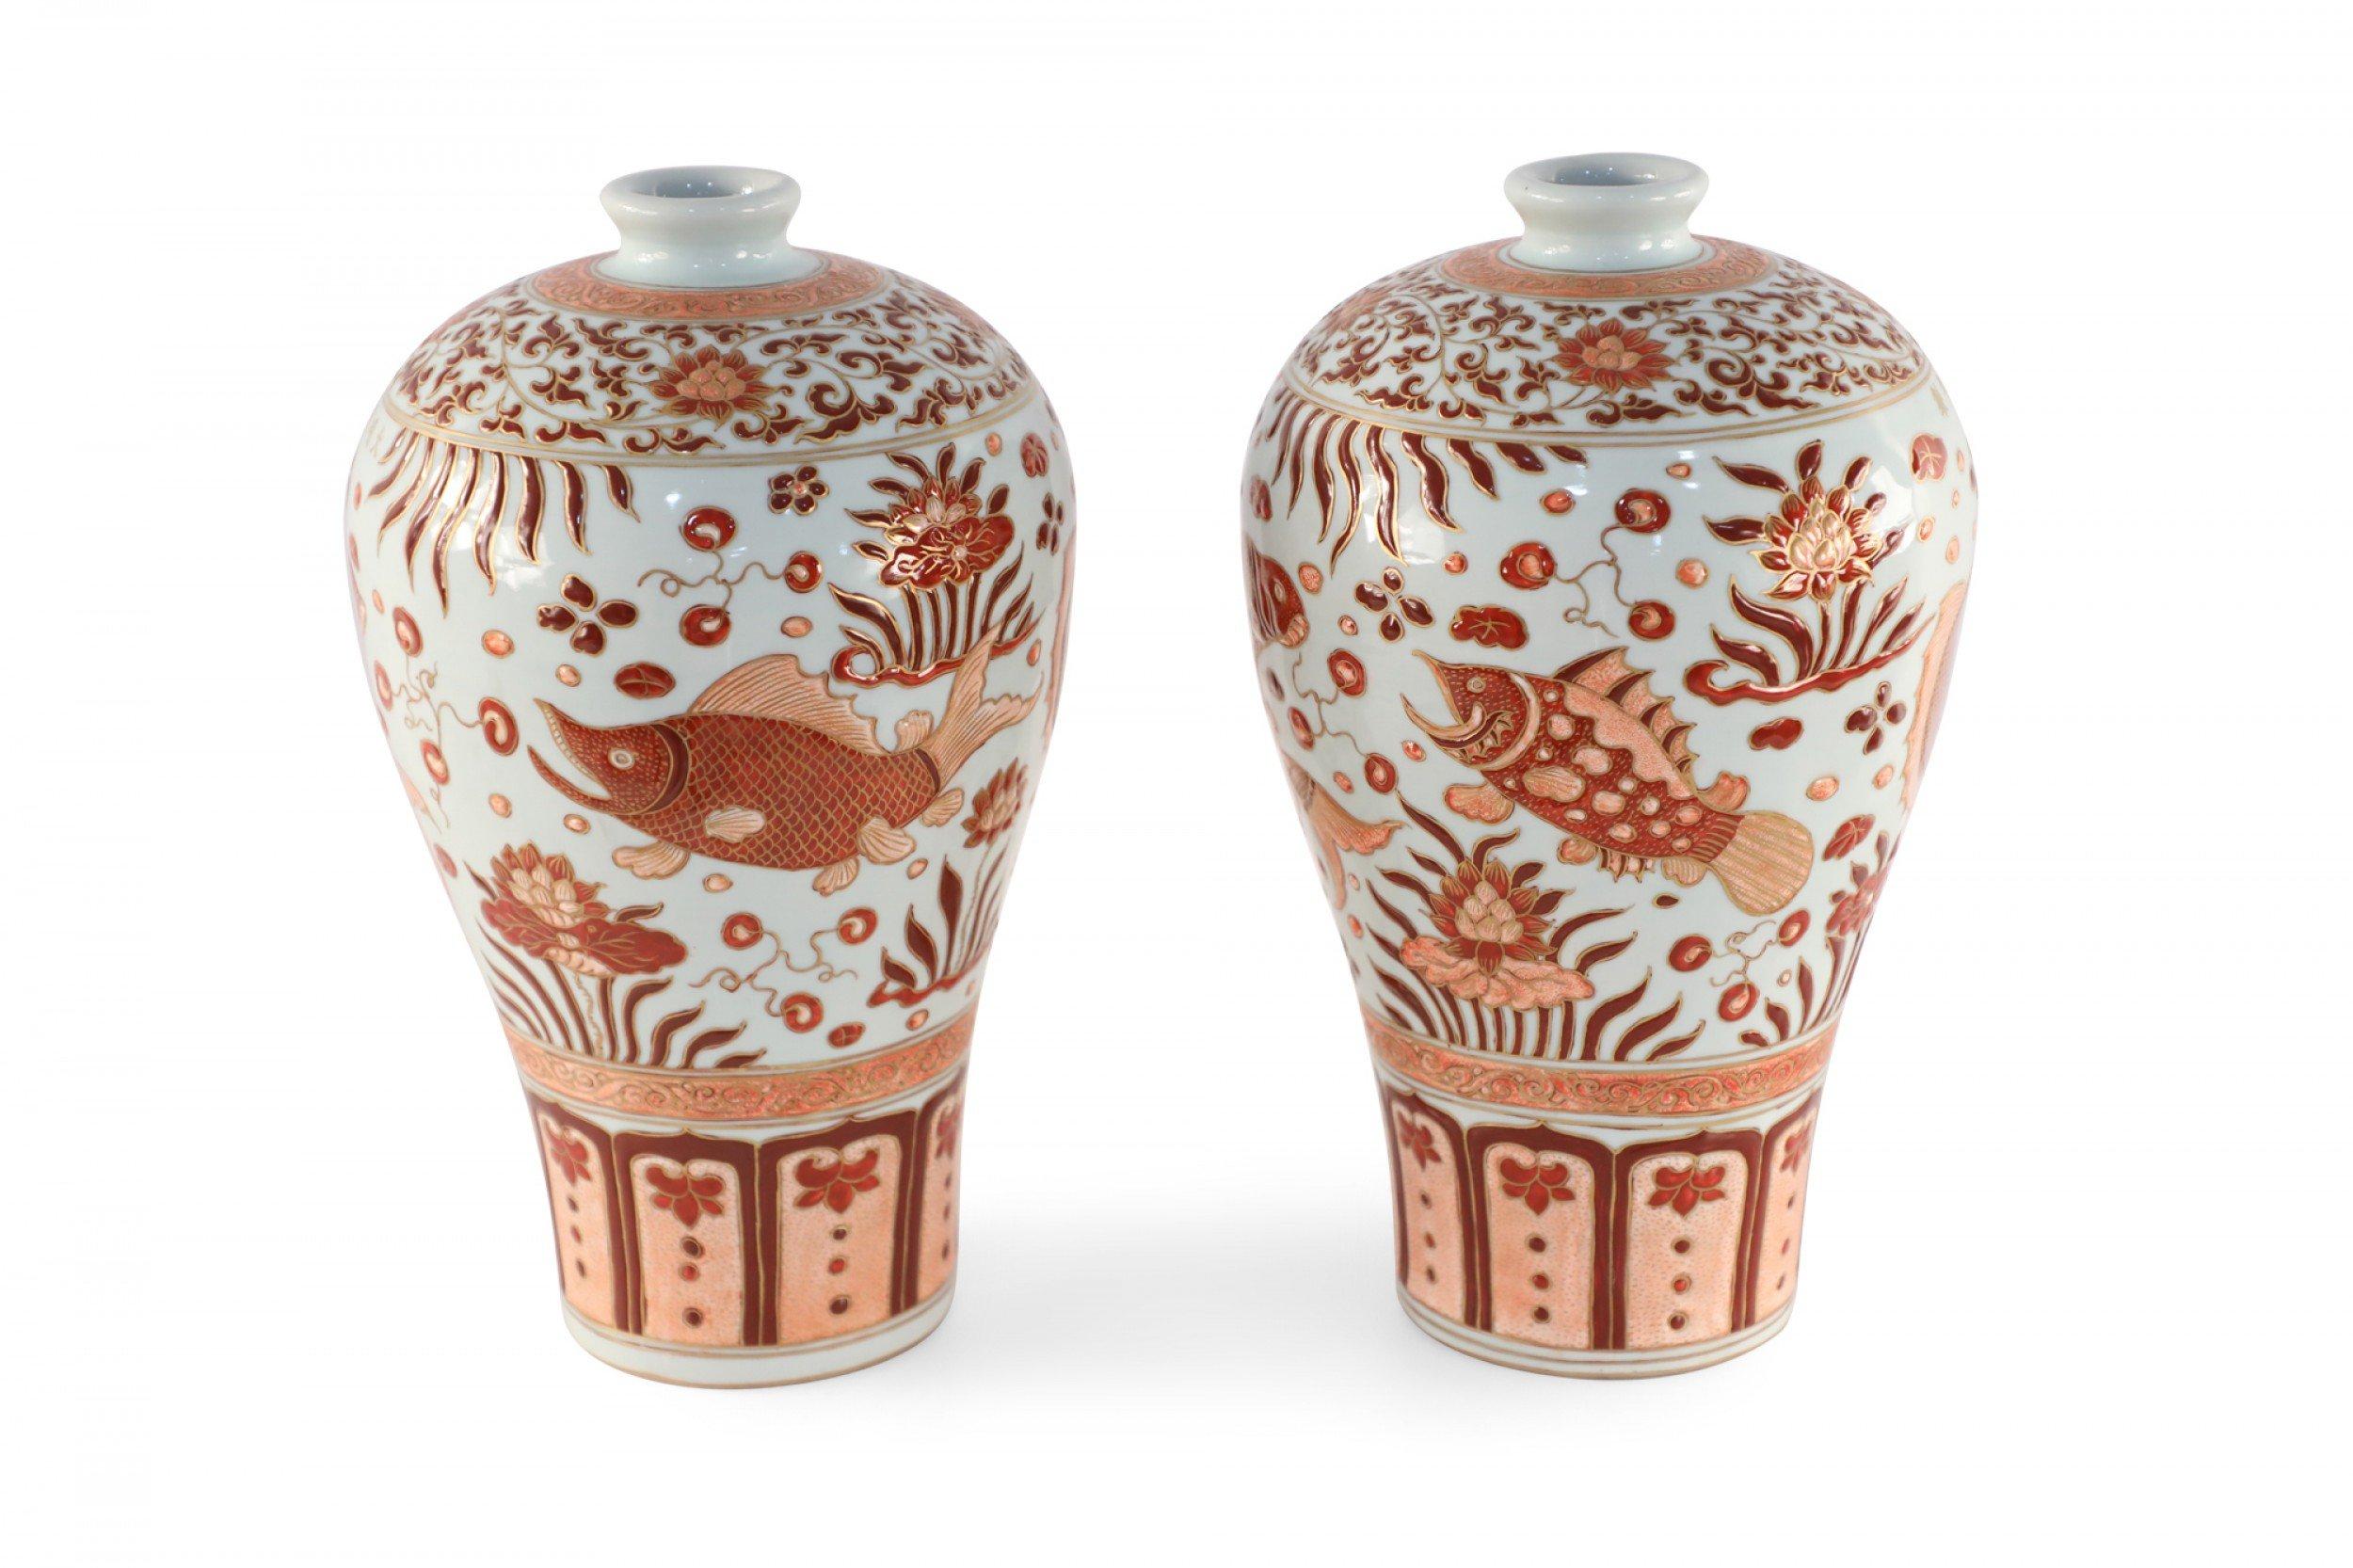 Chinese Export Pair of Chinese Beige and Orange Fish Design Meiping Porcelain Vases